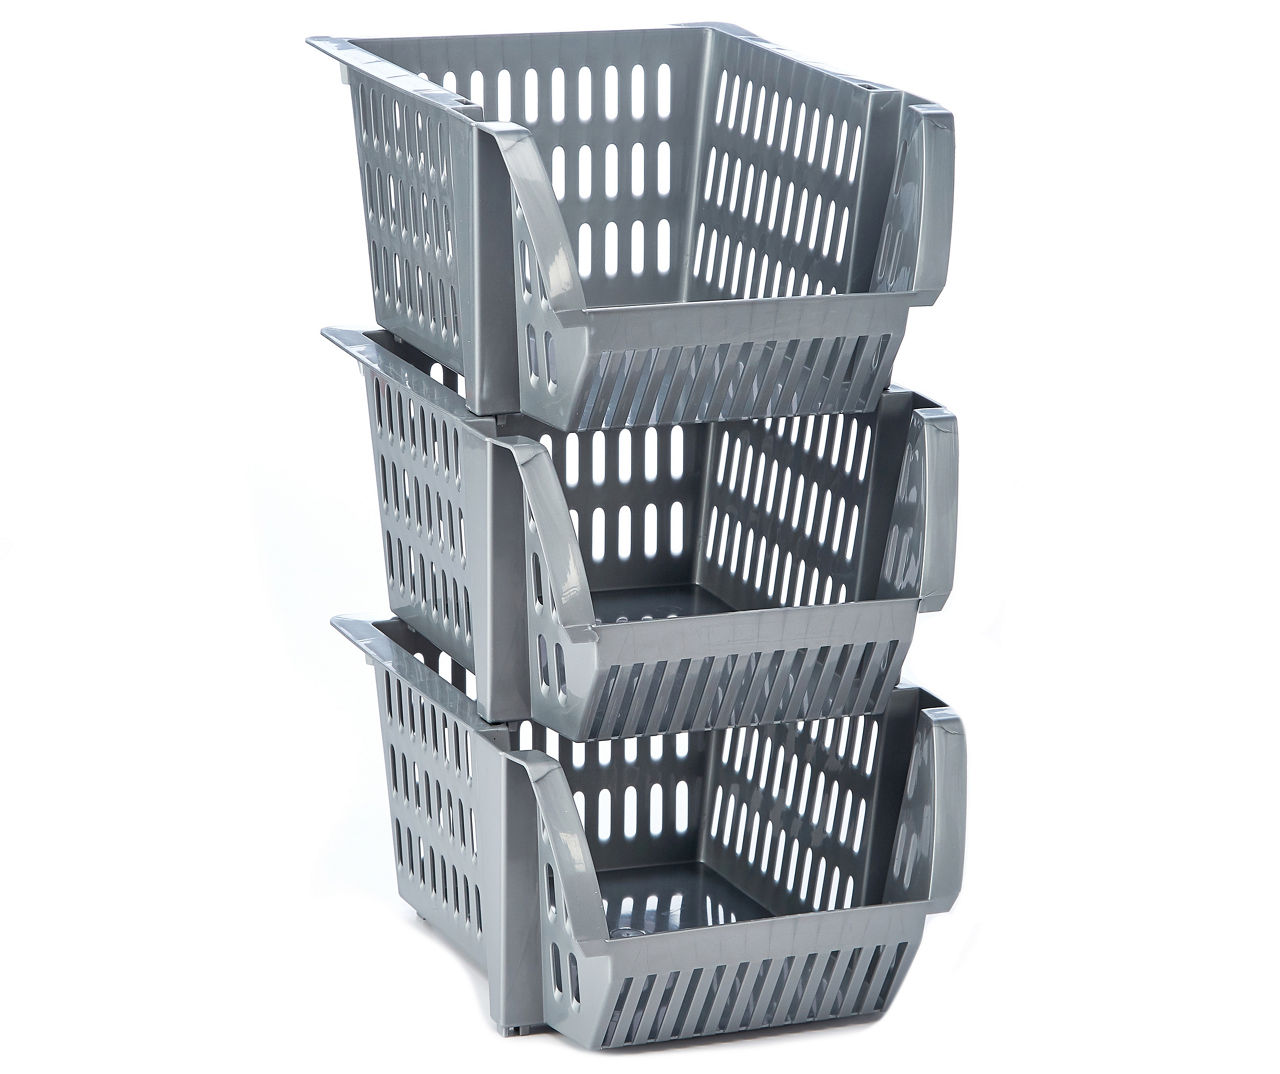 Used Nesting and Stackable Bins